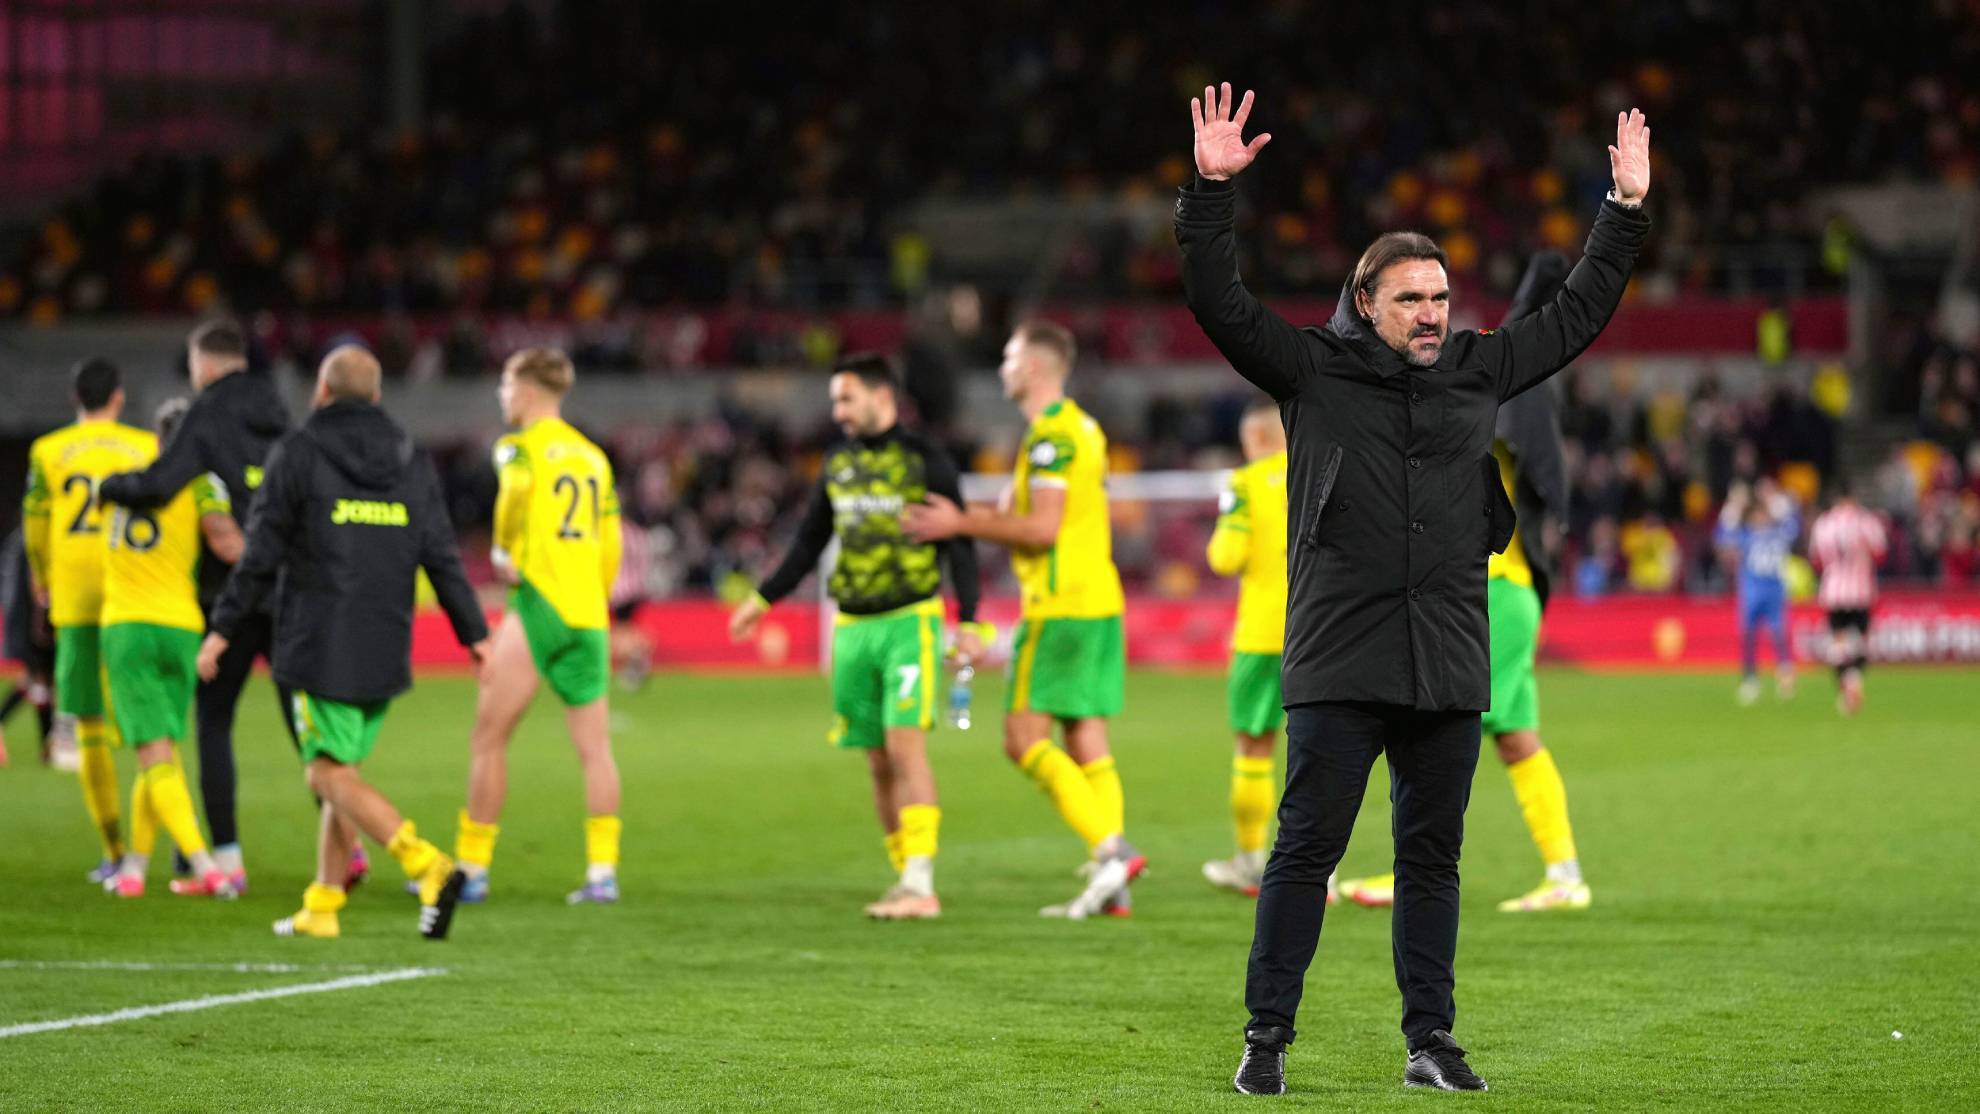 Norwich City manager Daniel Farke salutes the fans after the final whistle of the English Premier League soccer match between Brentford and Norwich City.